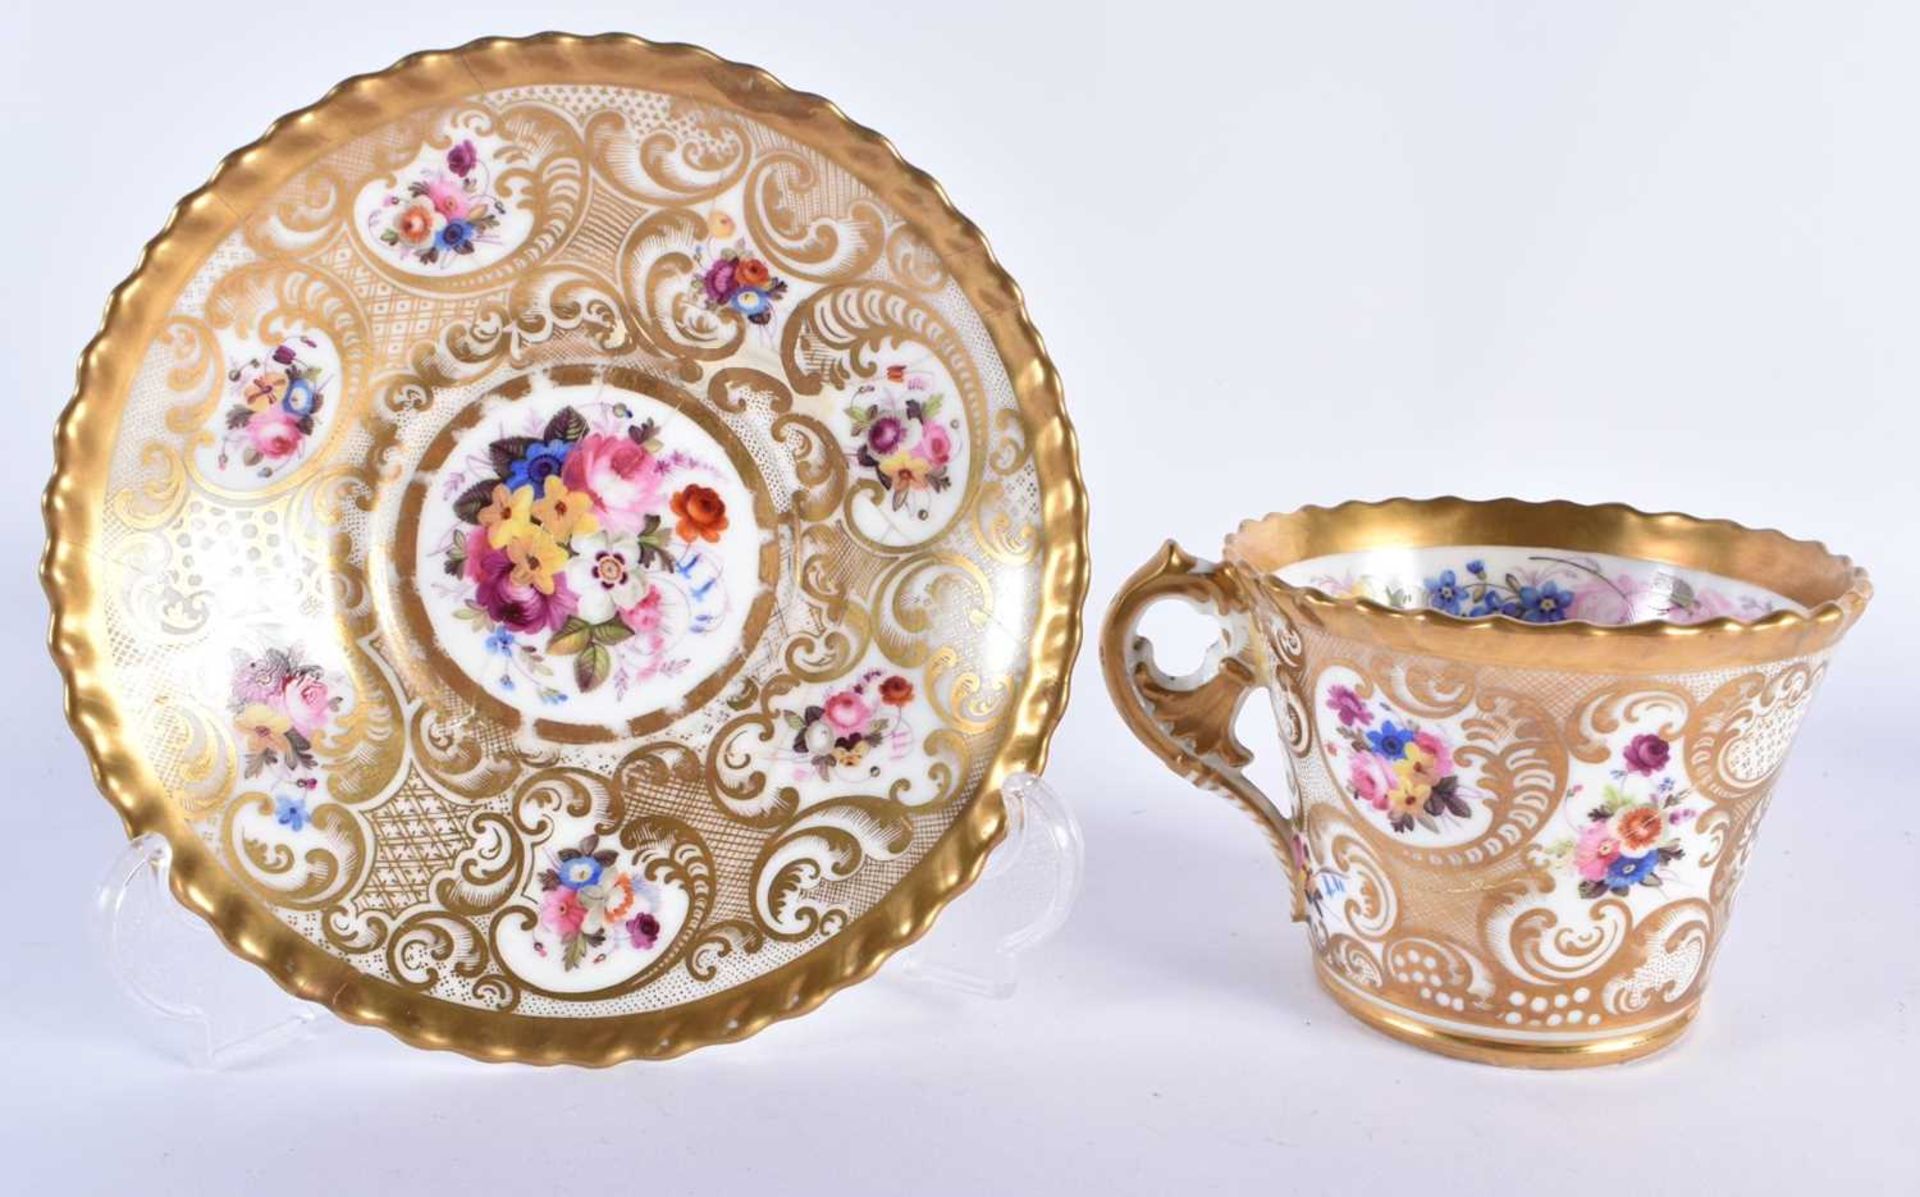 THREE EARLY 19TH CENTURY CHAMBERLAINS WORCESTER PORCELAIN CUPS AND SAUCERS painted with armorials - Image 5 of 31